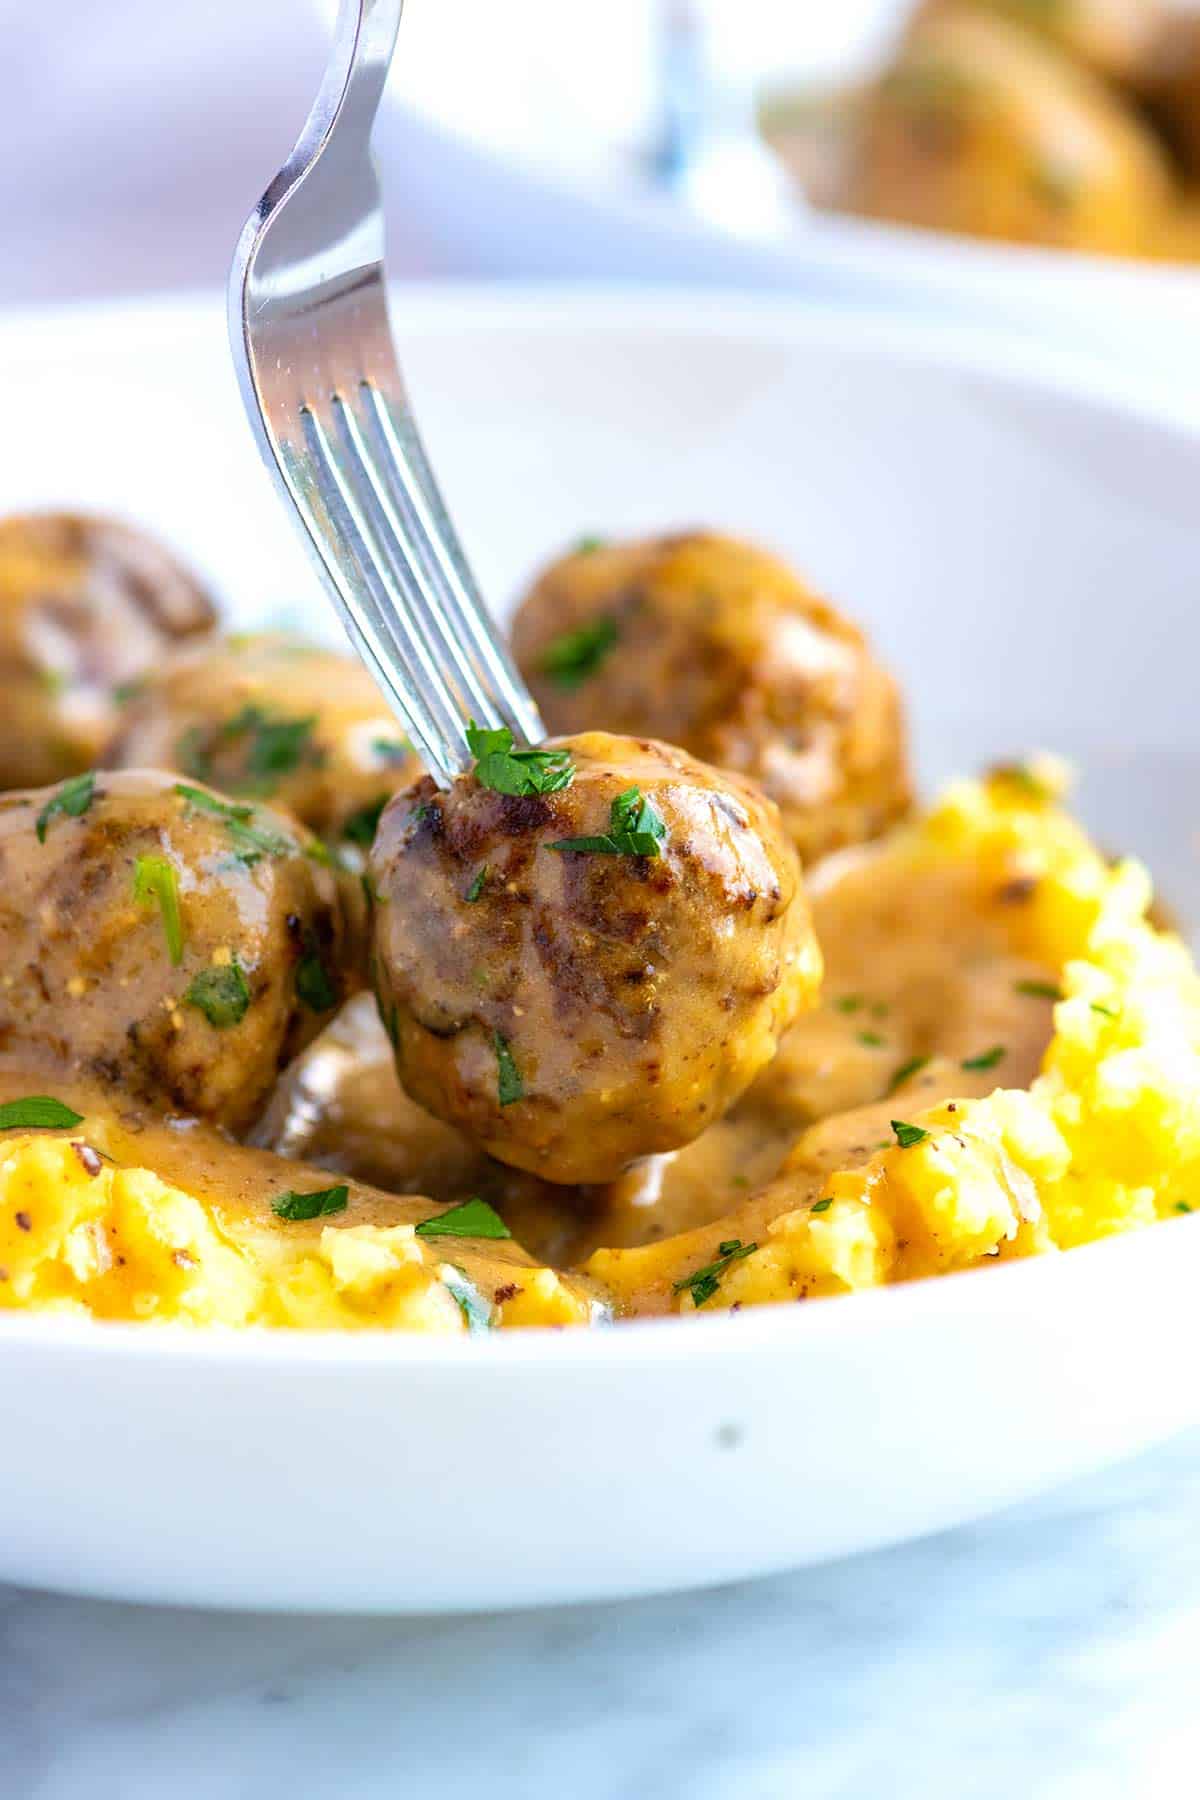 Juicy and Tender Swedish Meatballs with Gravy